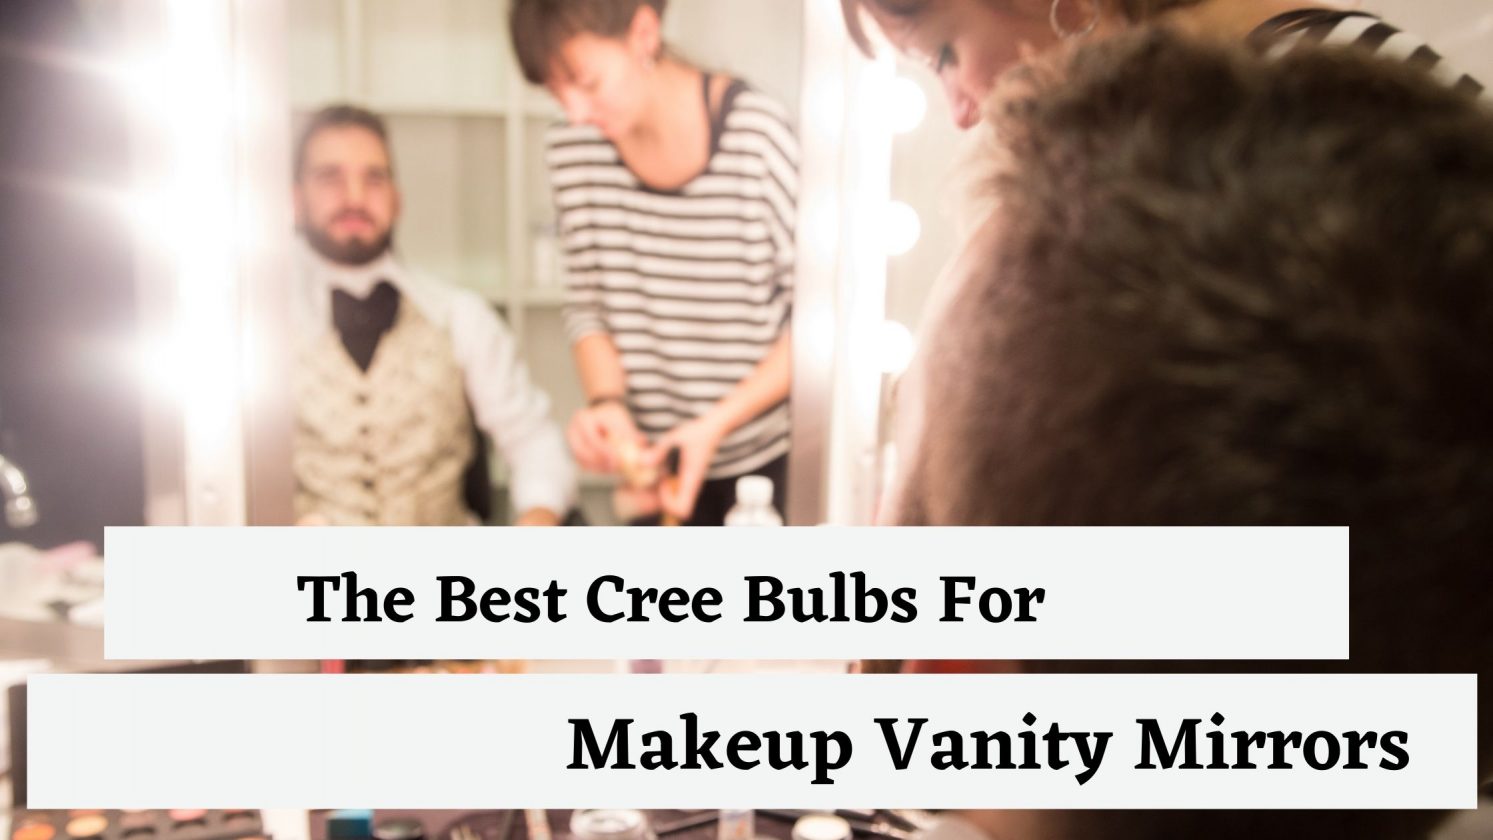 The Best Cree Bulbs For Makeup Vanity Mirrors